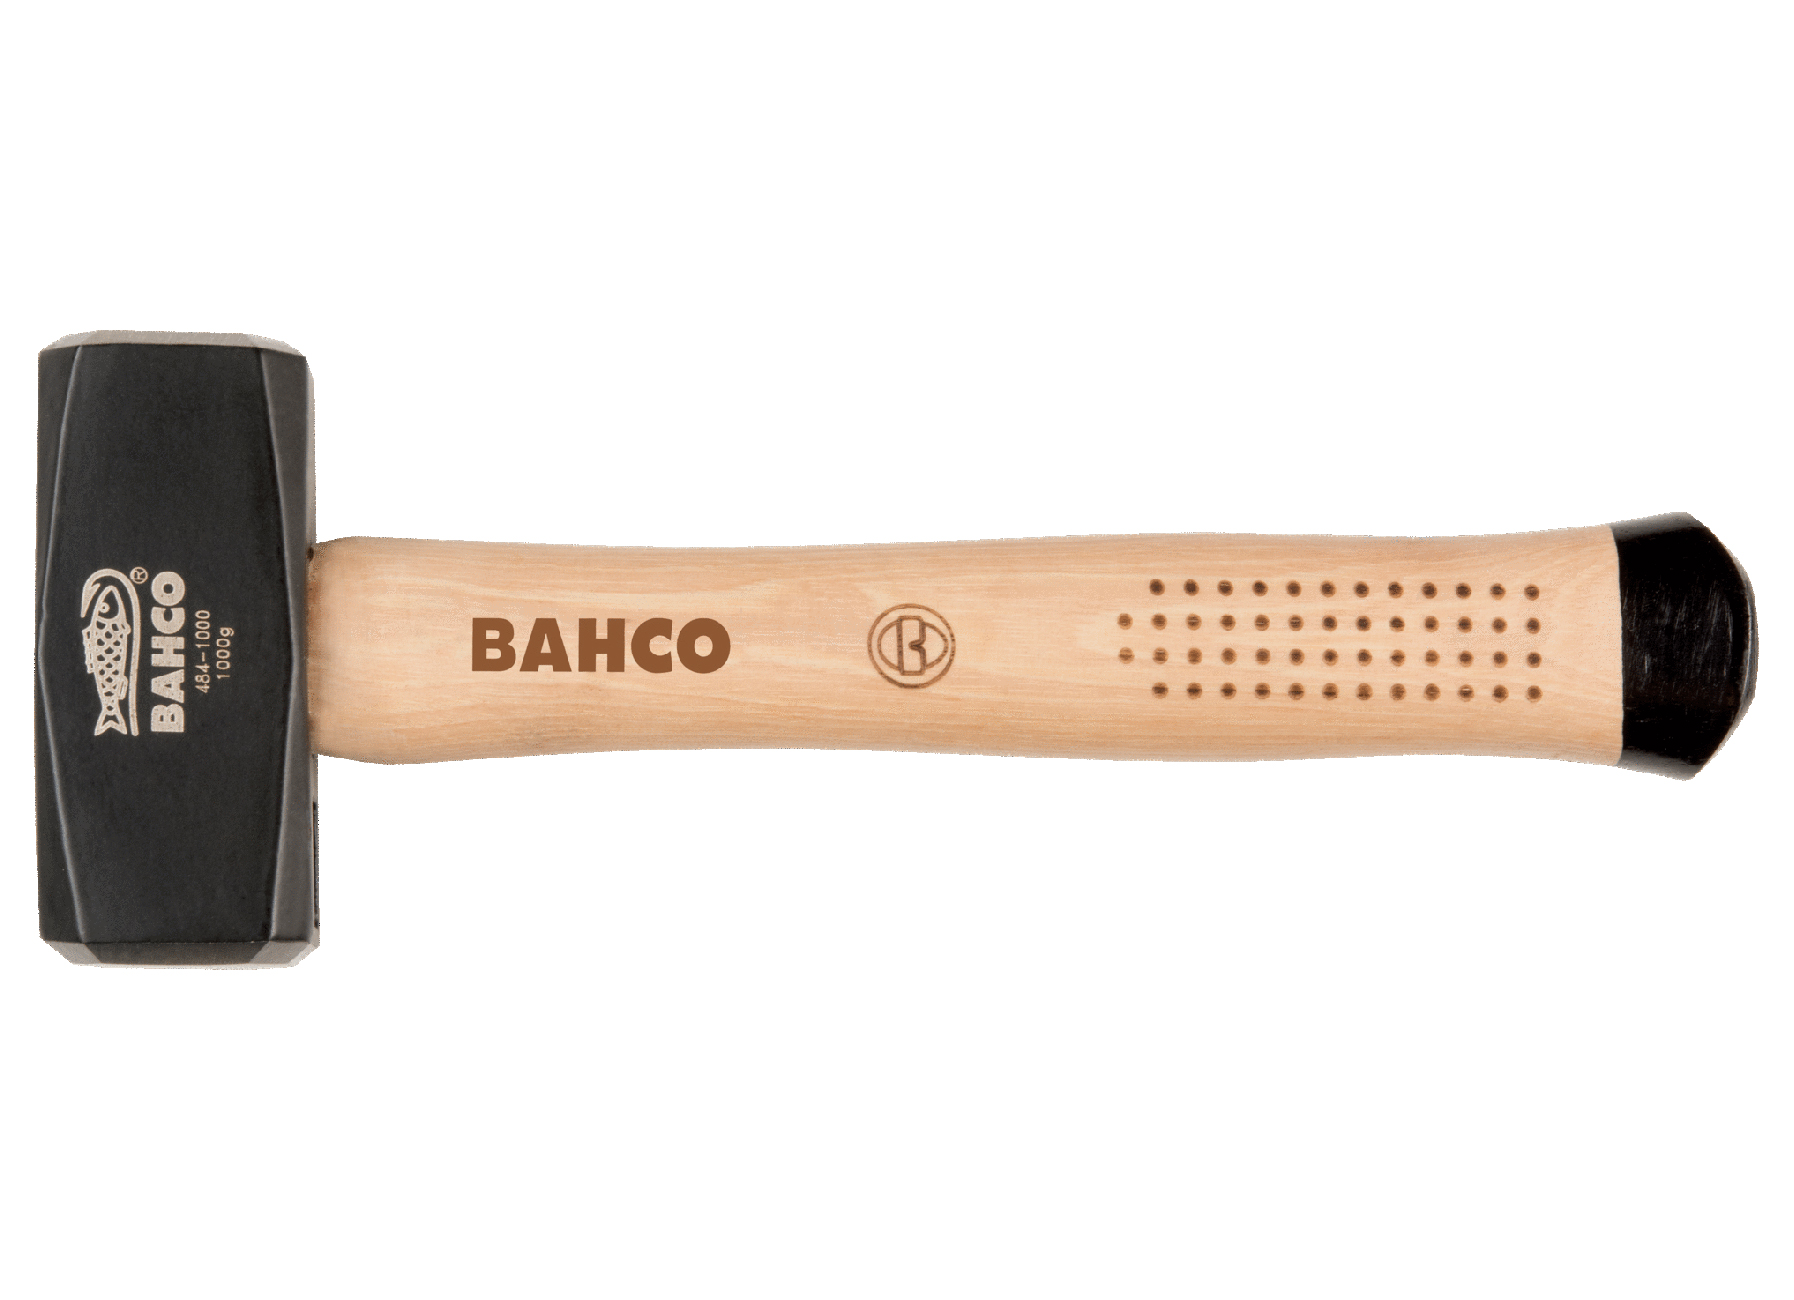 BAHCO 484 MASSETTE MANCHE D''HICKORY 1500G